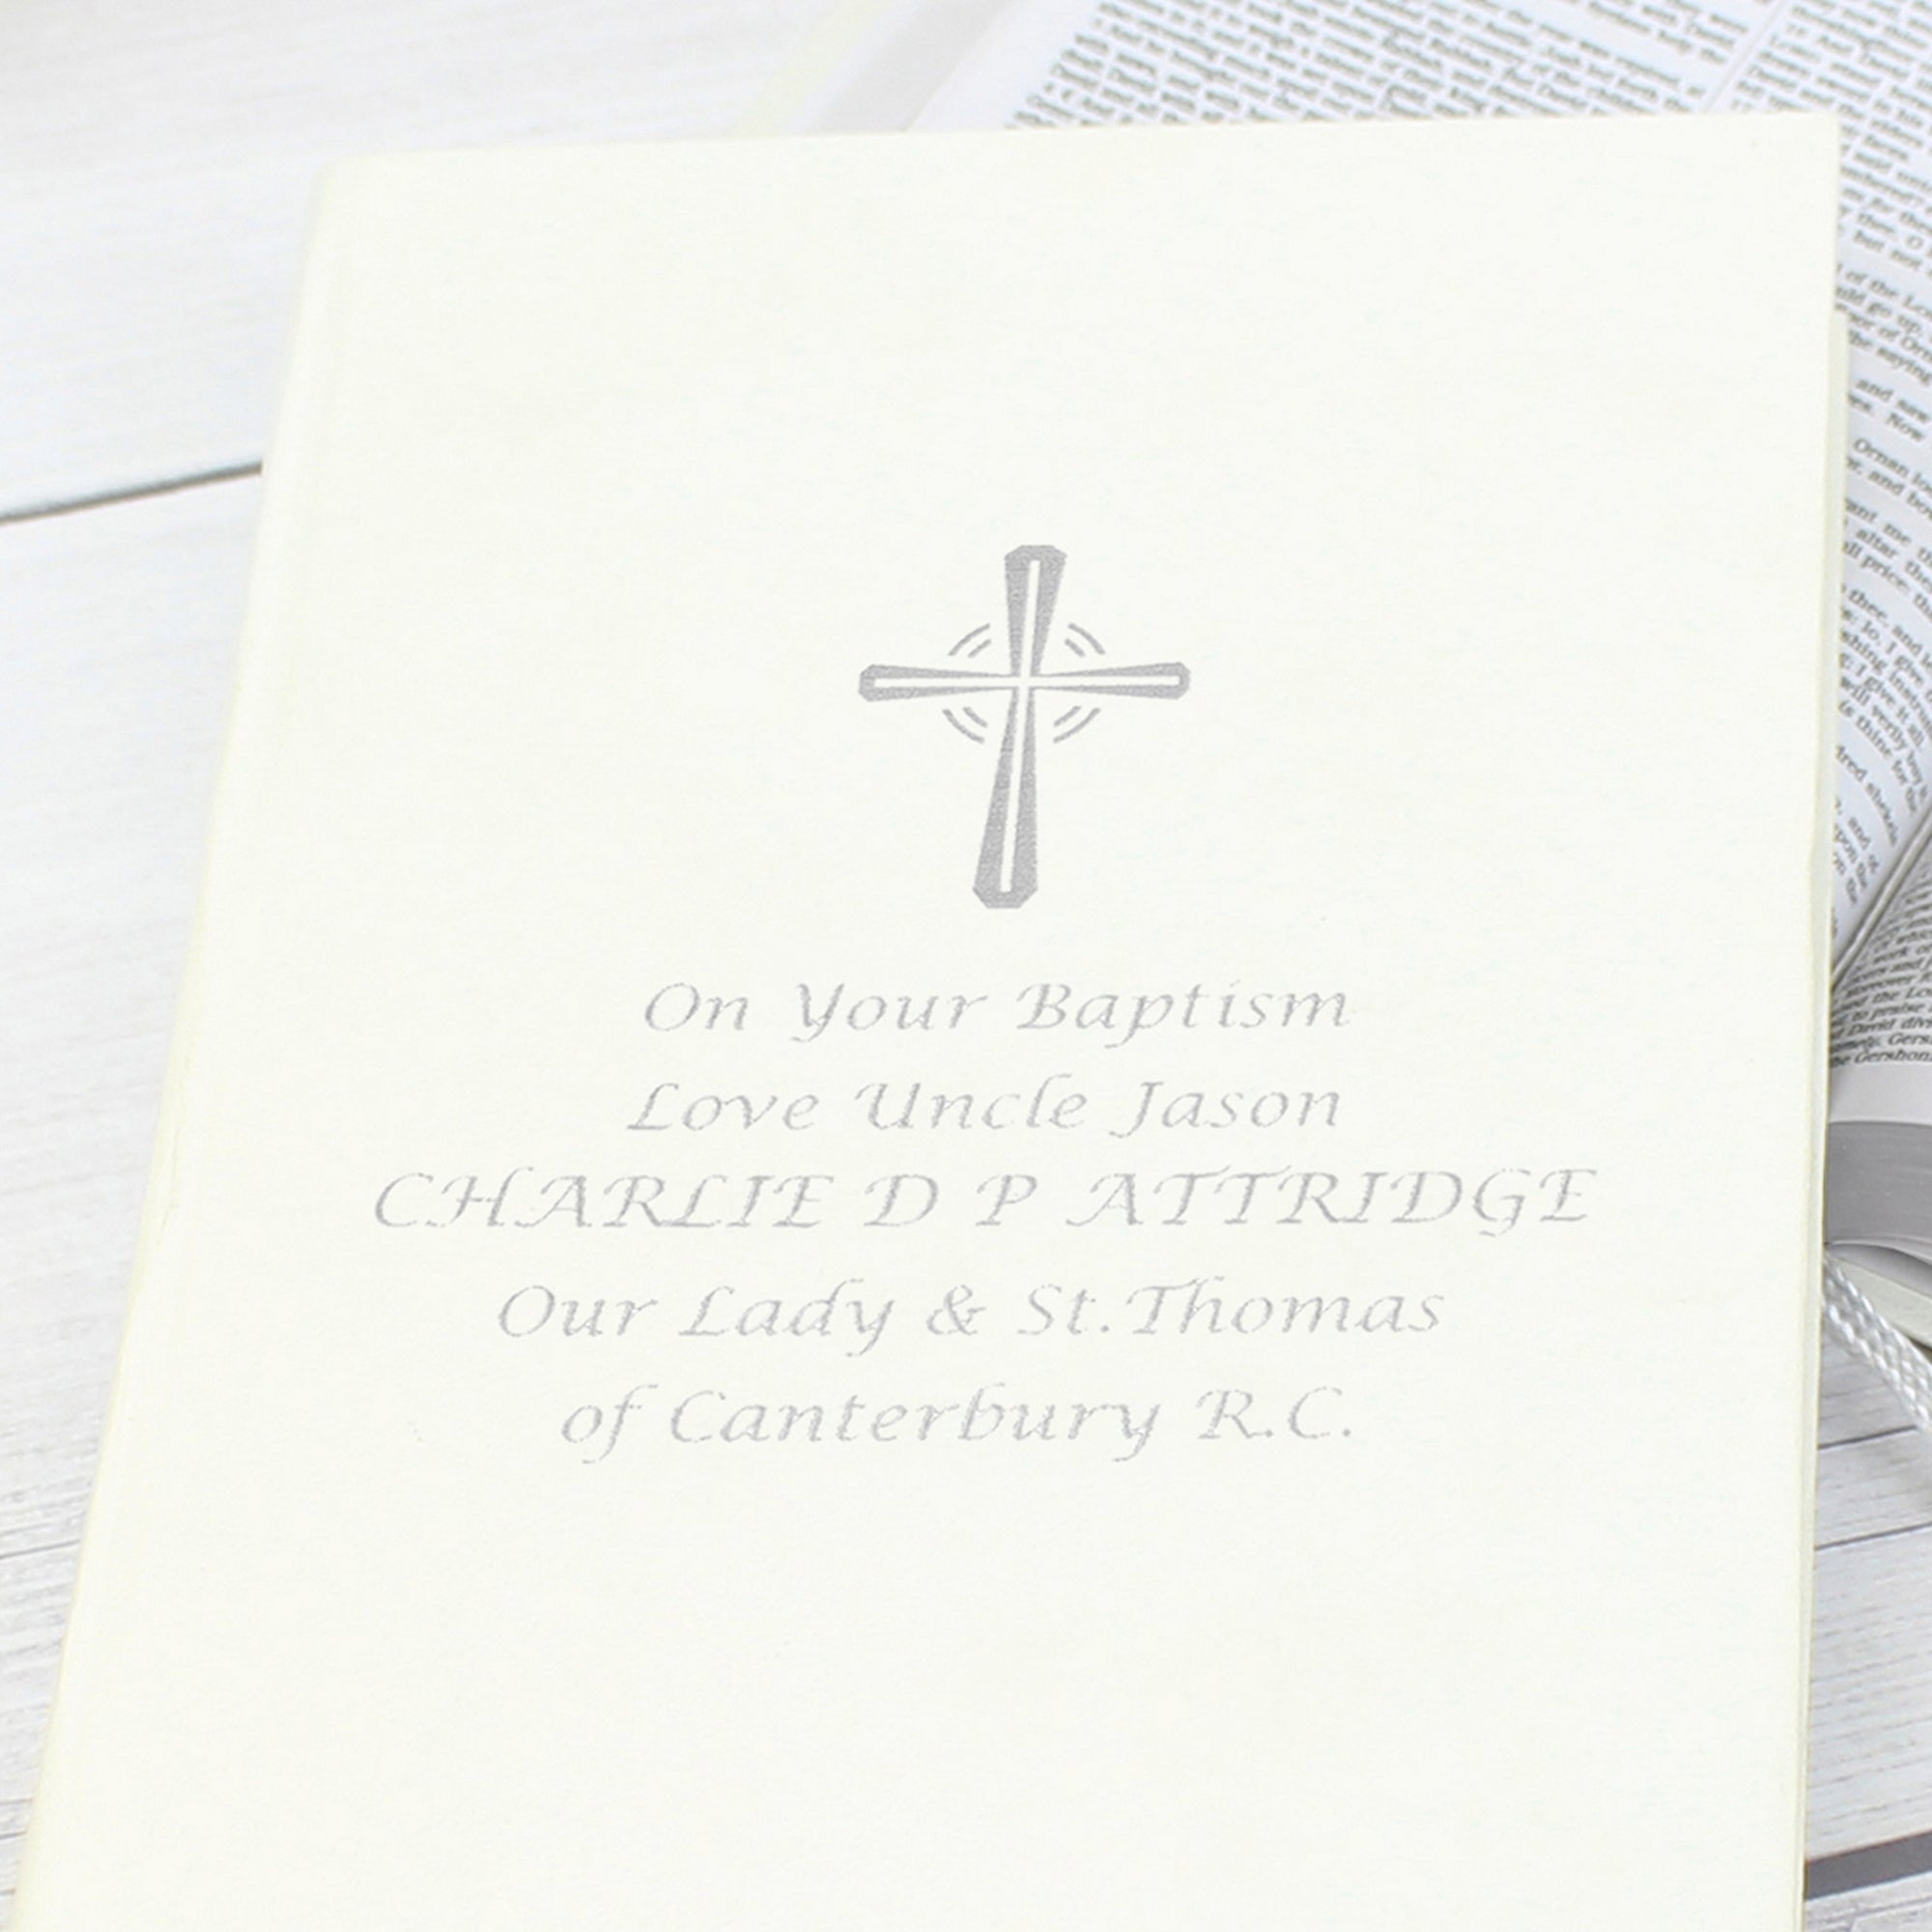 Image of a bible with white cover that can be personalised with 5 lines of your own text. A cross is printed above the text, all of which is printed in silver. The bible has a ribbon bookmark and the pages are made from 100% recycled paper.